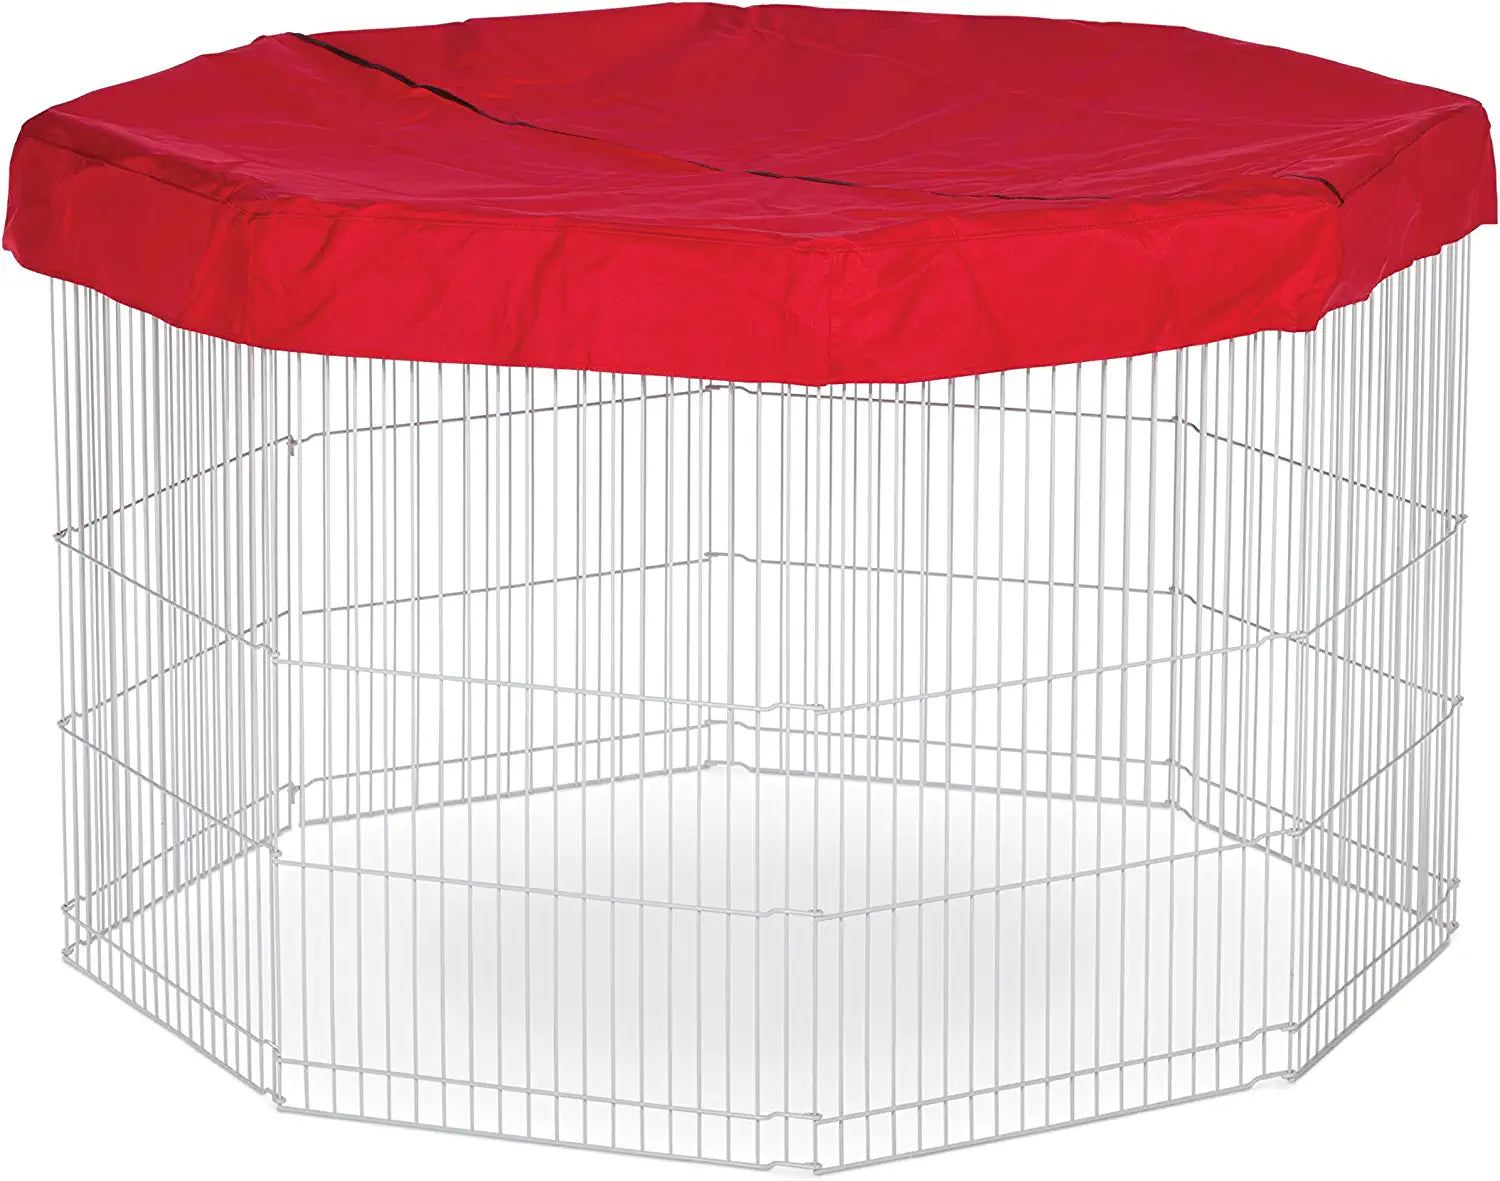 Prevue Pet Products SPV40097 Mat/Cover for 8-Panel Play Pen, Red